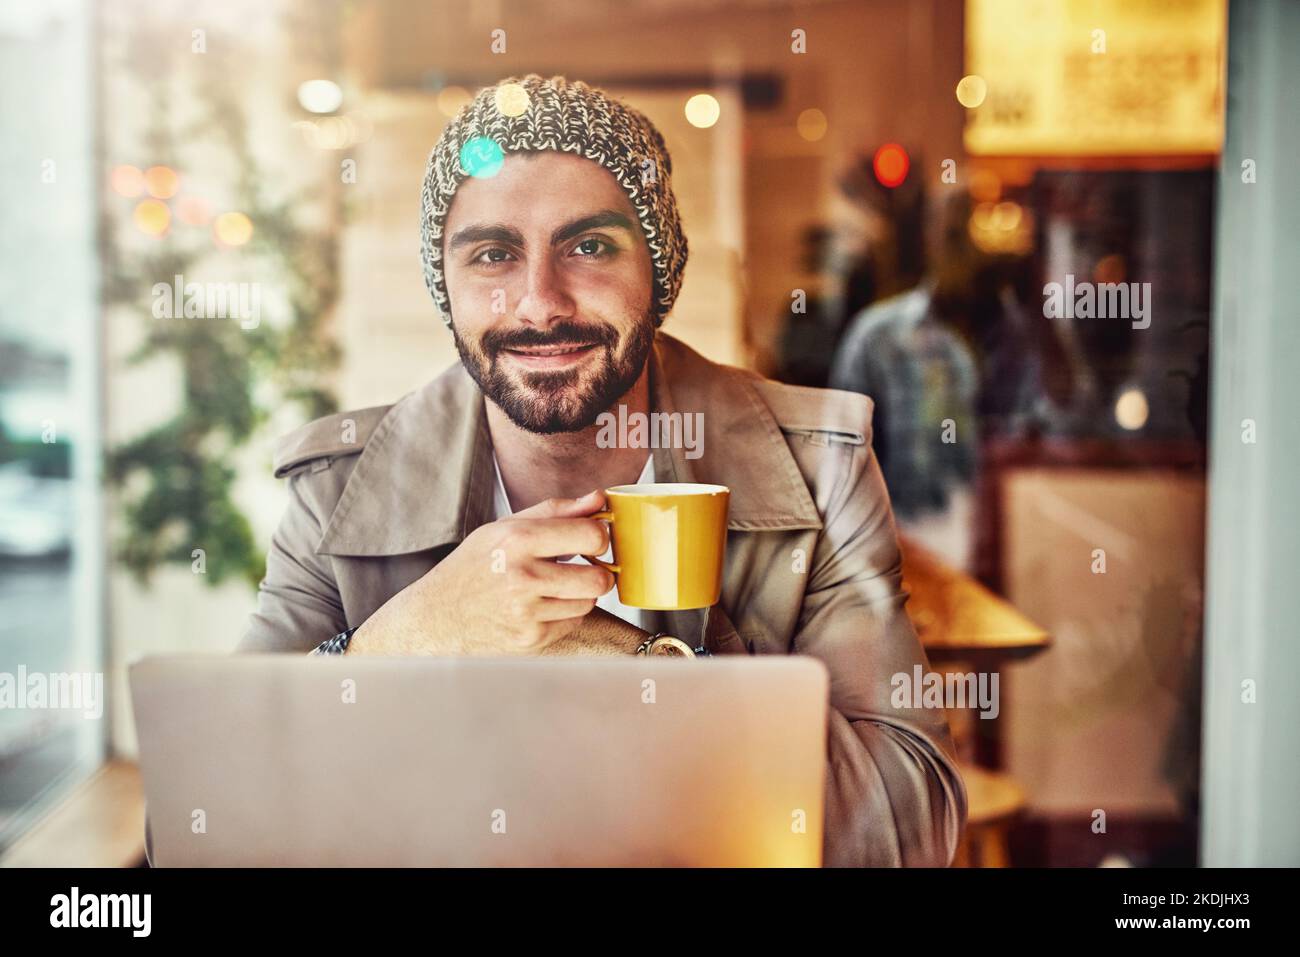 Just chilling at my local cafe. Portrait of a stylish young man smiling while drinking a coffee and using a laptop in a cafe. Stock Photo